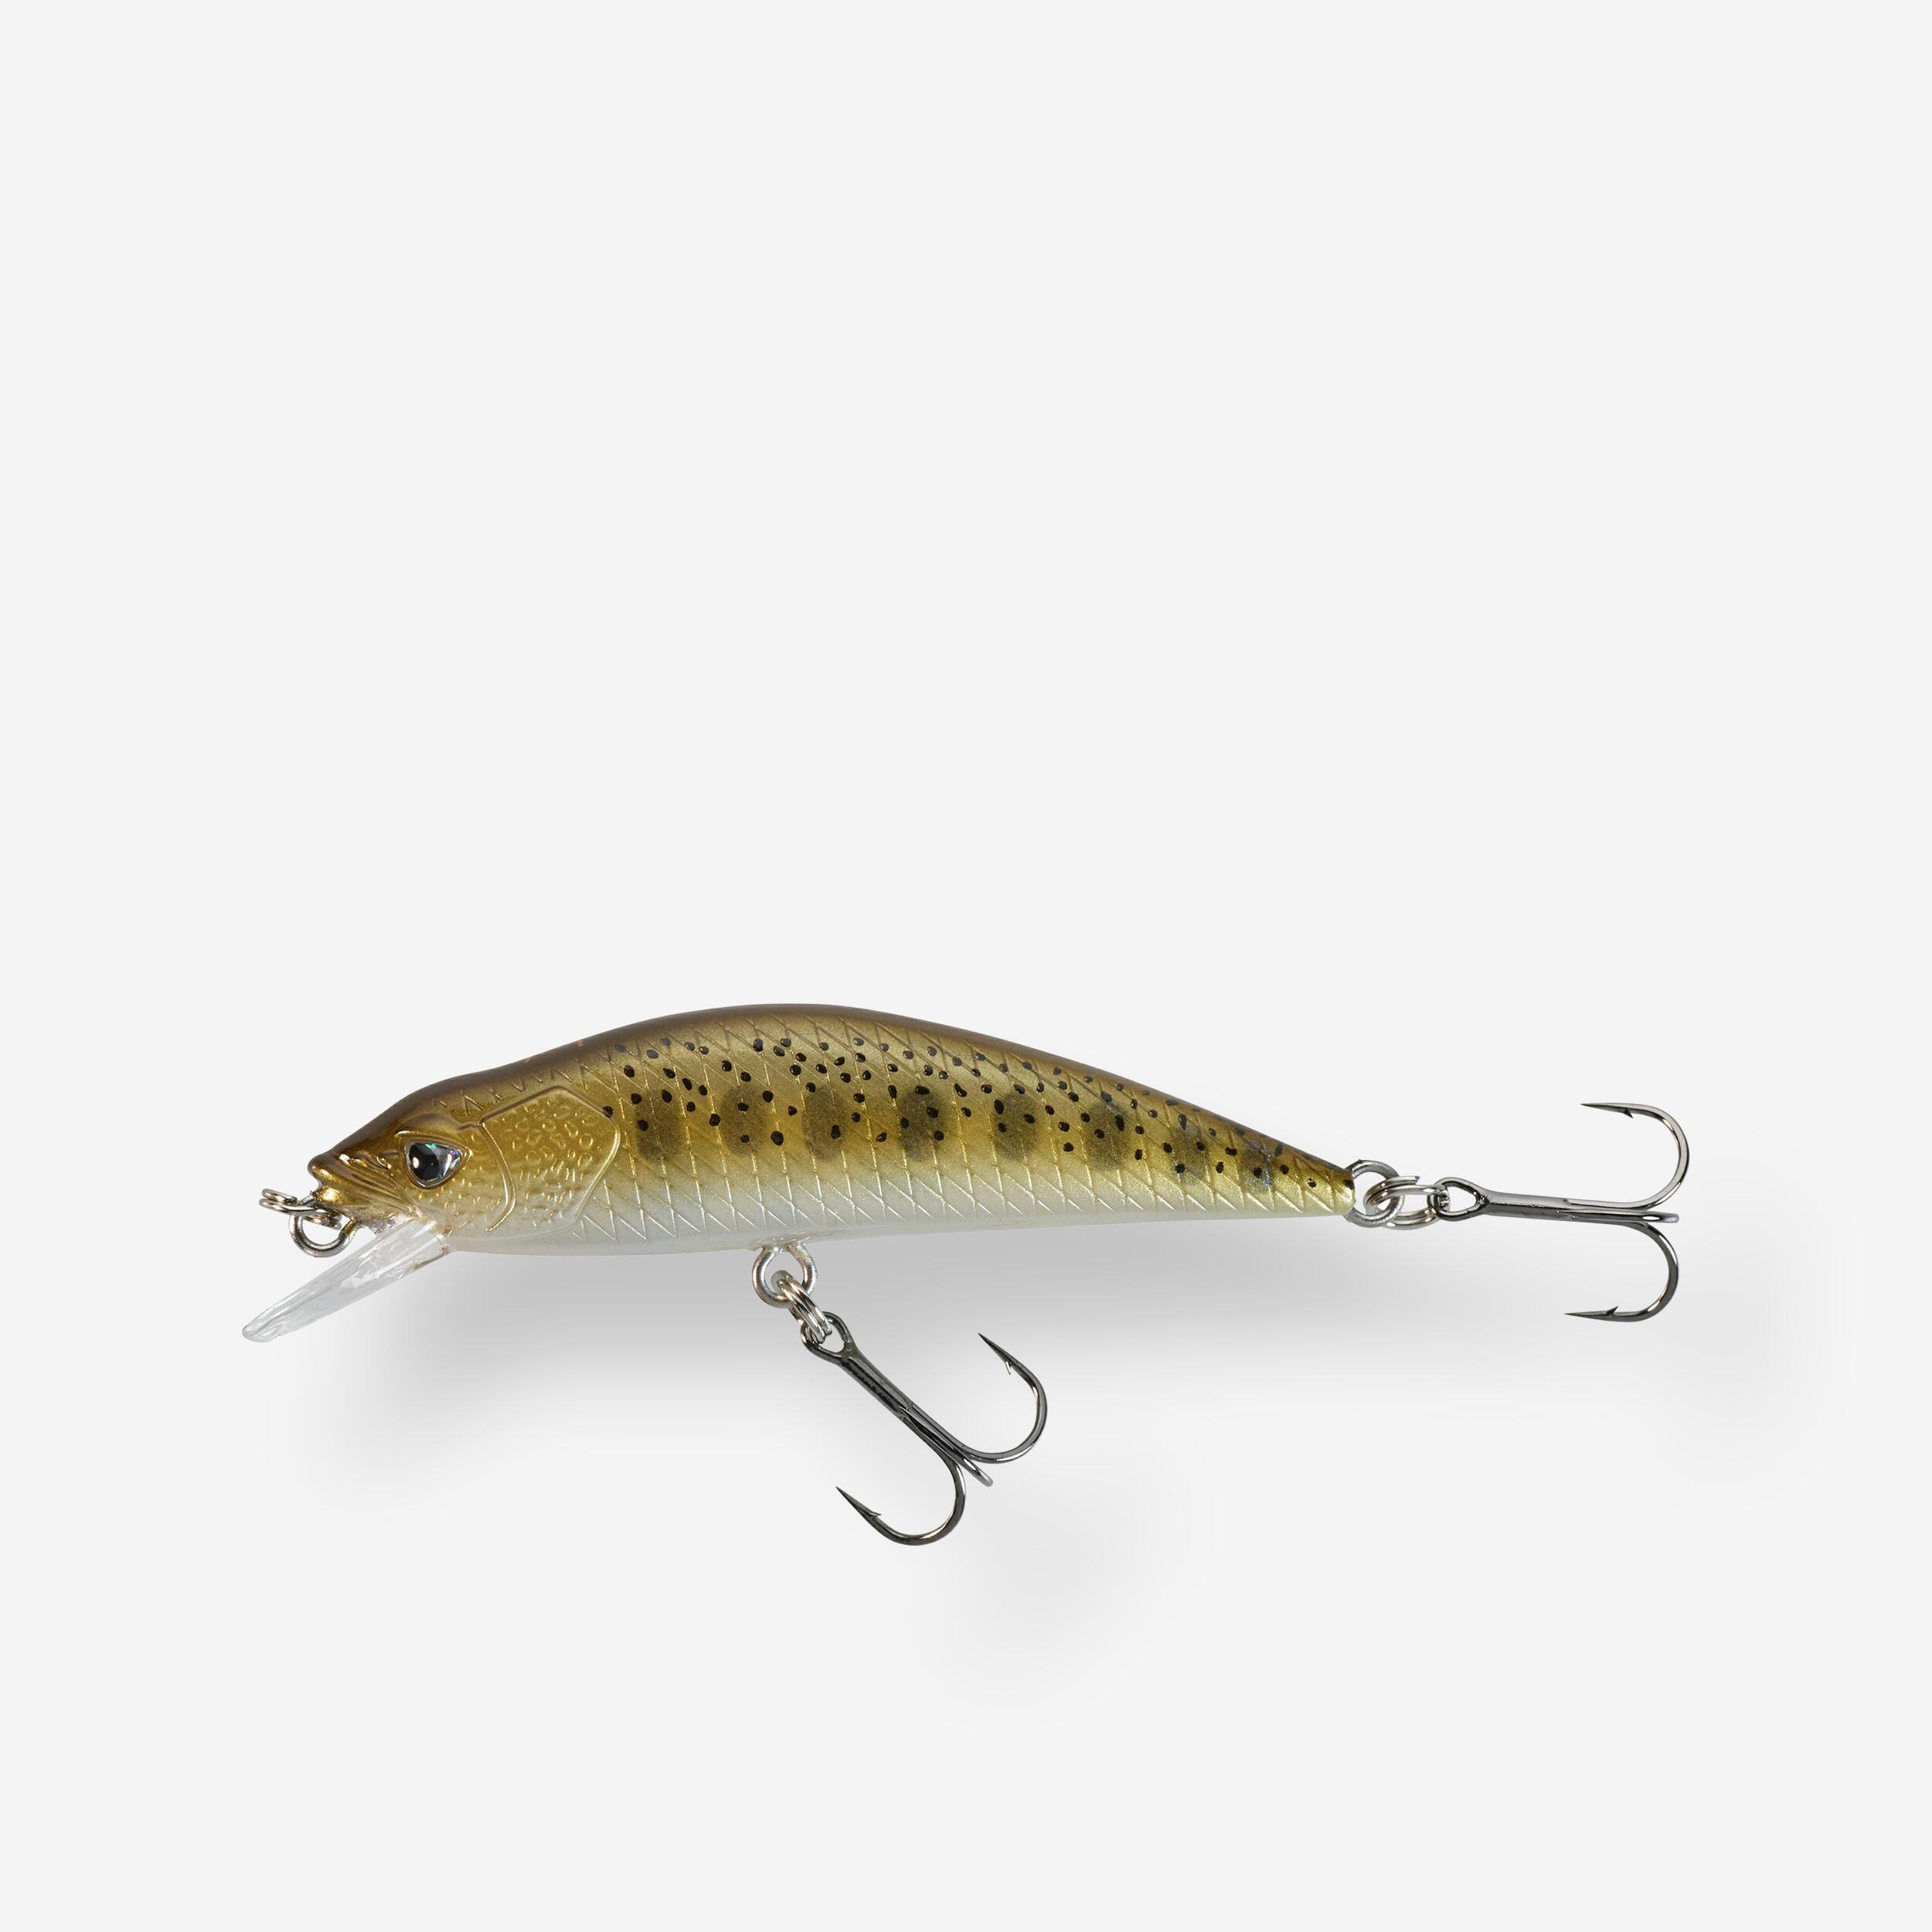 CAPERLAN MINNOW HARD LURE FOR TROUT WXM  MNWFS 50 US YAMAME - BROWN